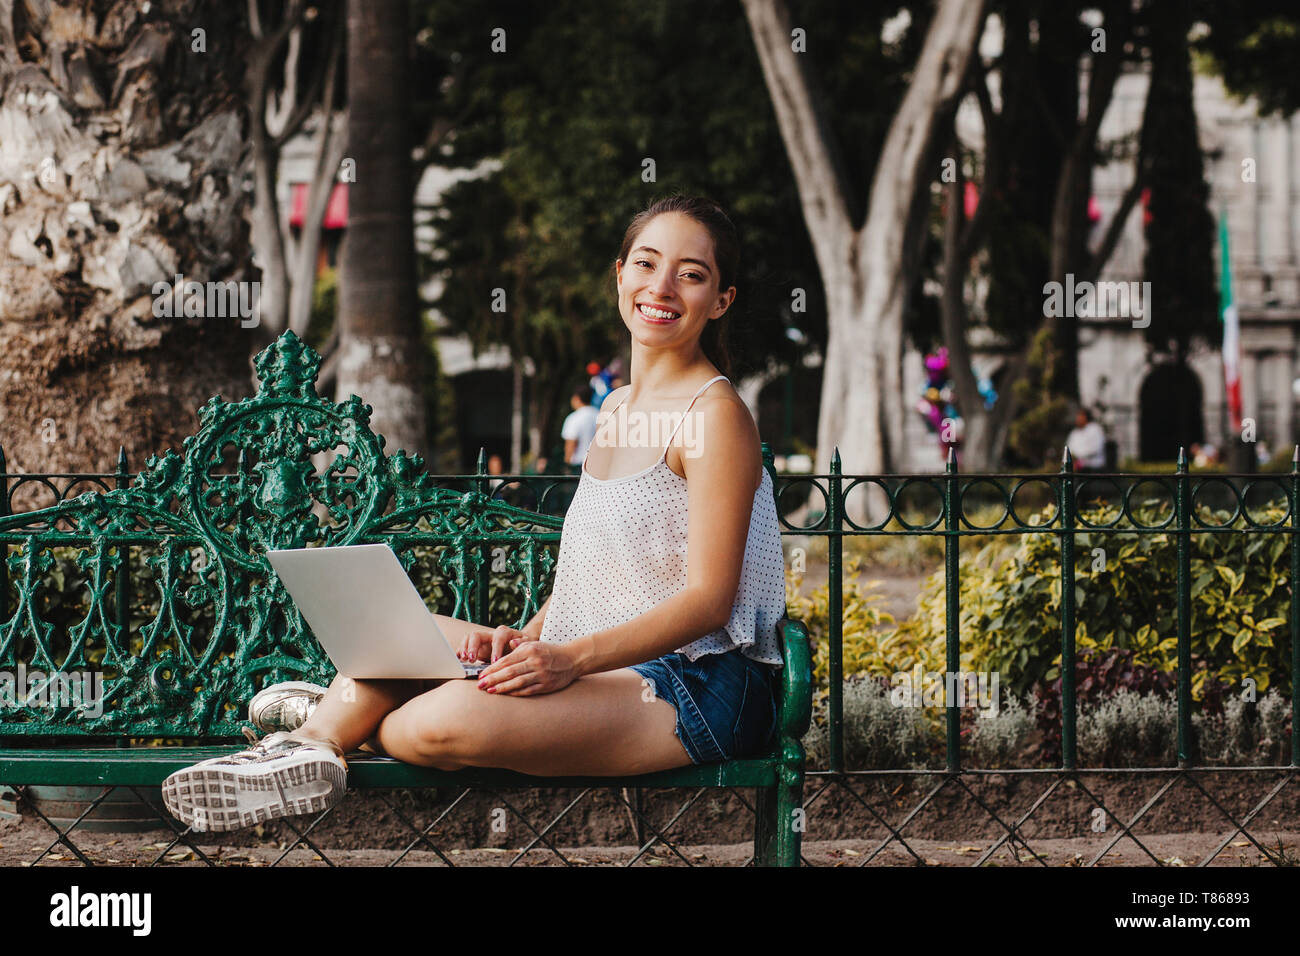 Latin Woman holding a laptop and smiling in Mexico, mexican girl Stock Photo